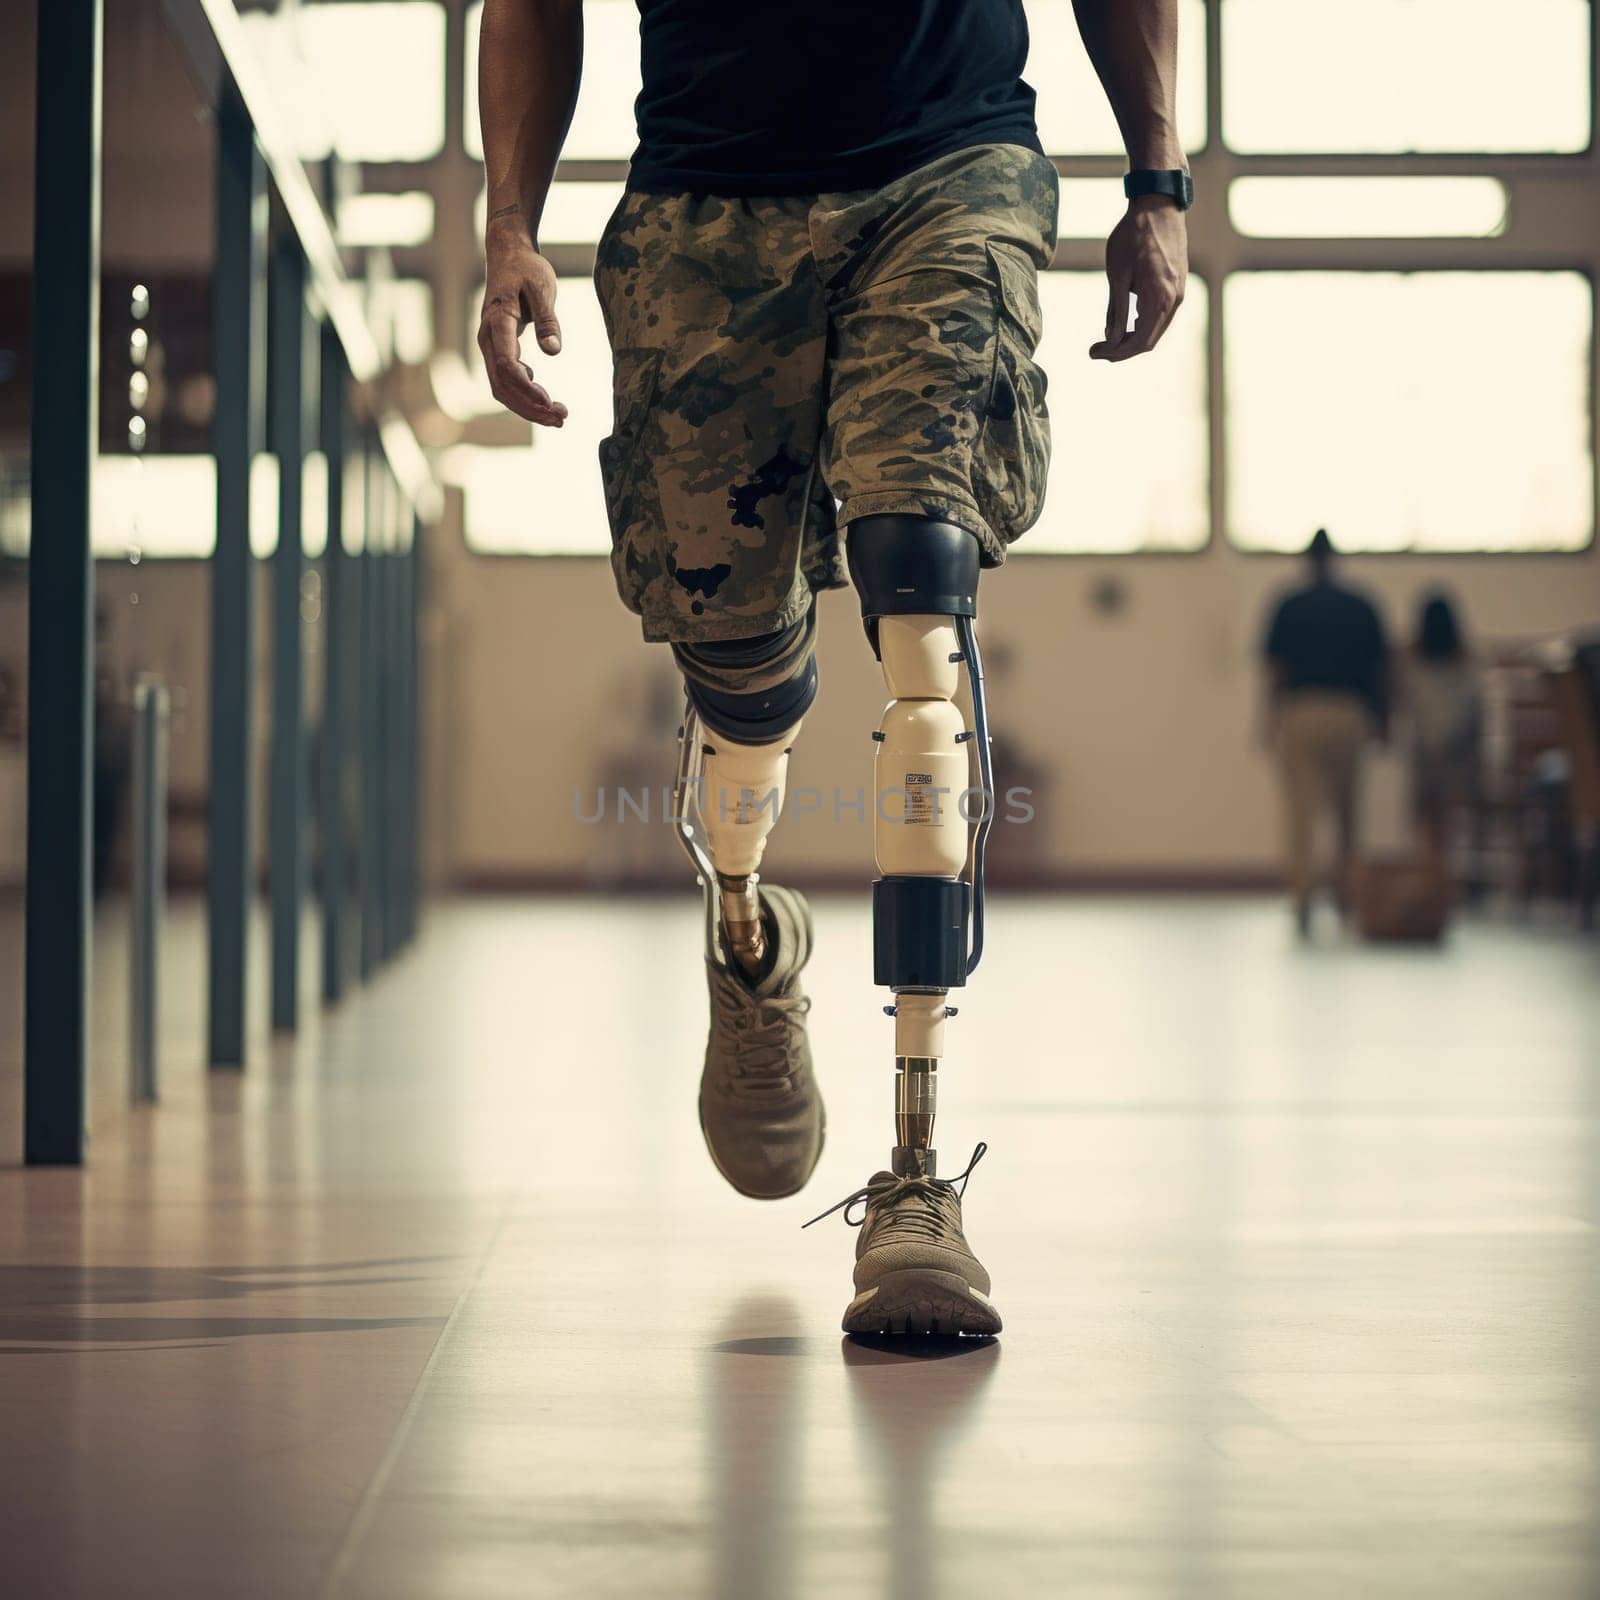 An emotional depiction of a man with prosthetic legs, highlighting the importance of modern medical developments to overcome trauma and return to active life.